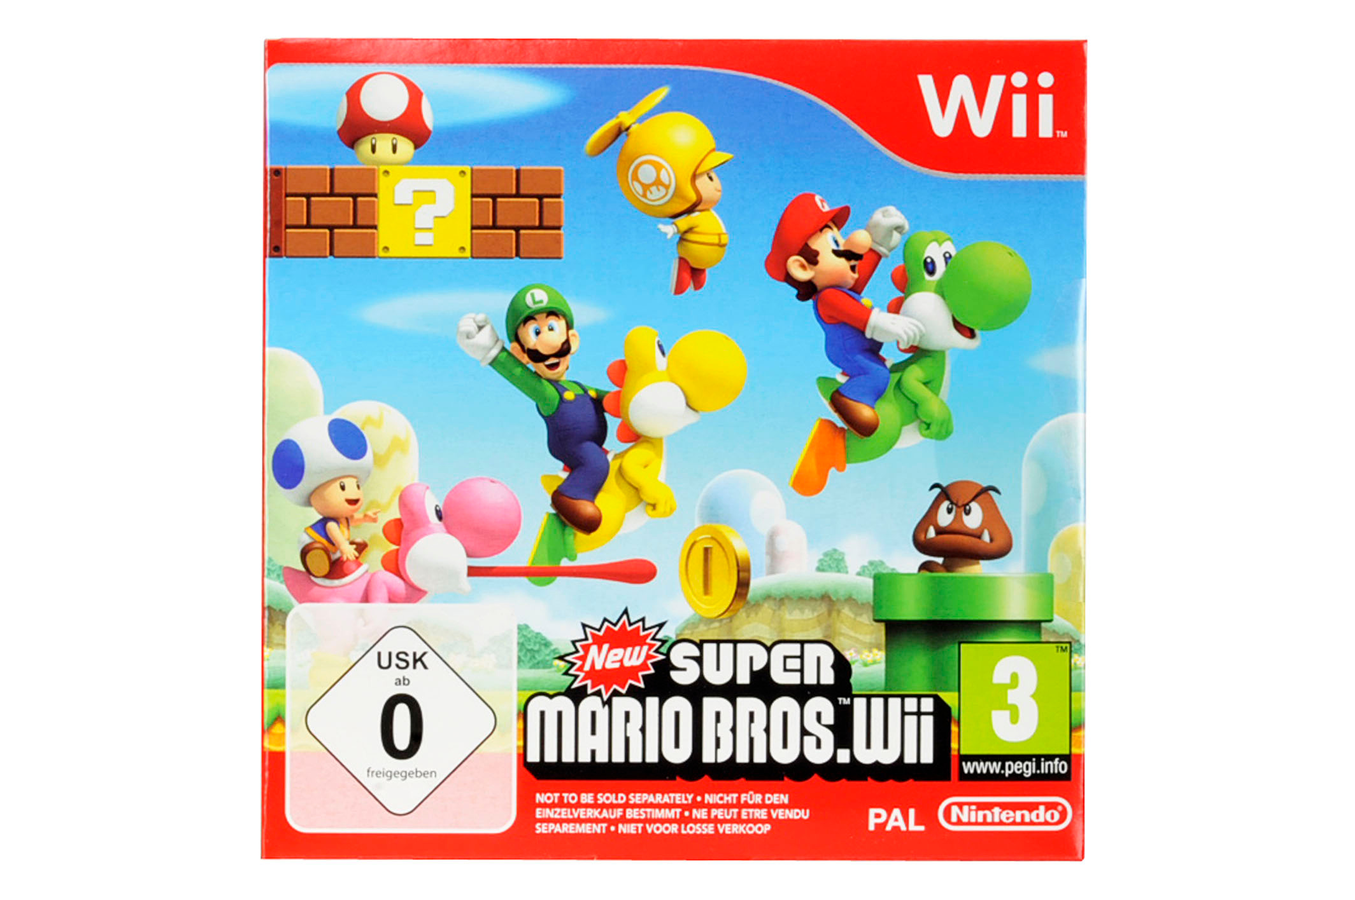 Consoles Wii Nintendo Wii Rouge New Super Mario Bros Wii Rouge New Smb 3361519 Darty 0124